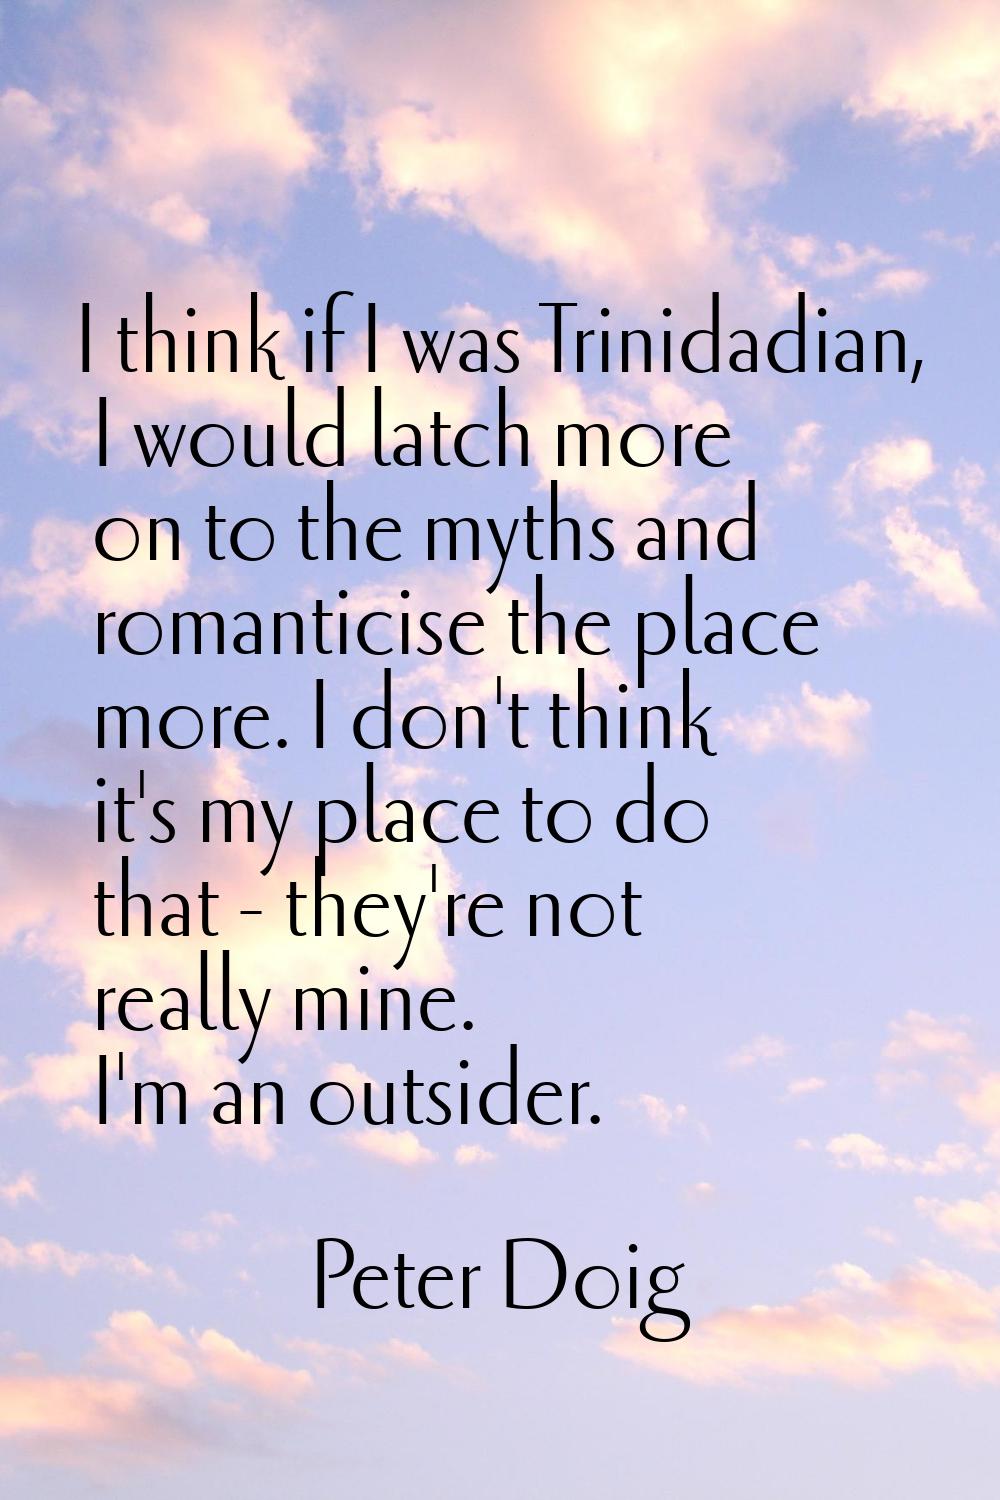 I think if I was Trinidadian, I would latch more on to the myths and romanticise the place more. I 